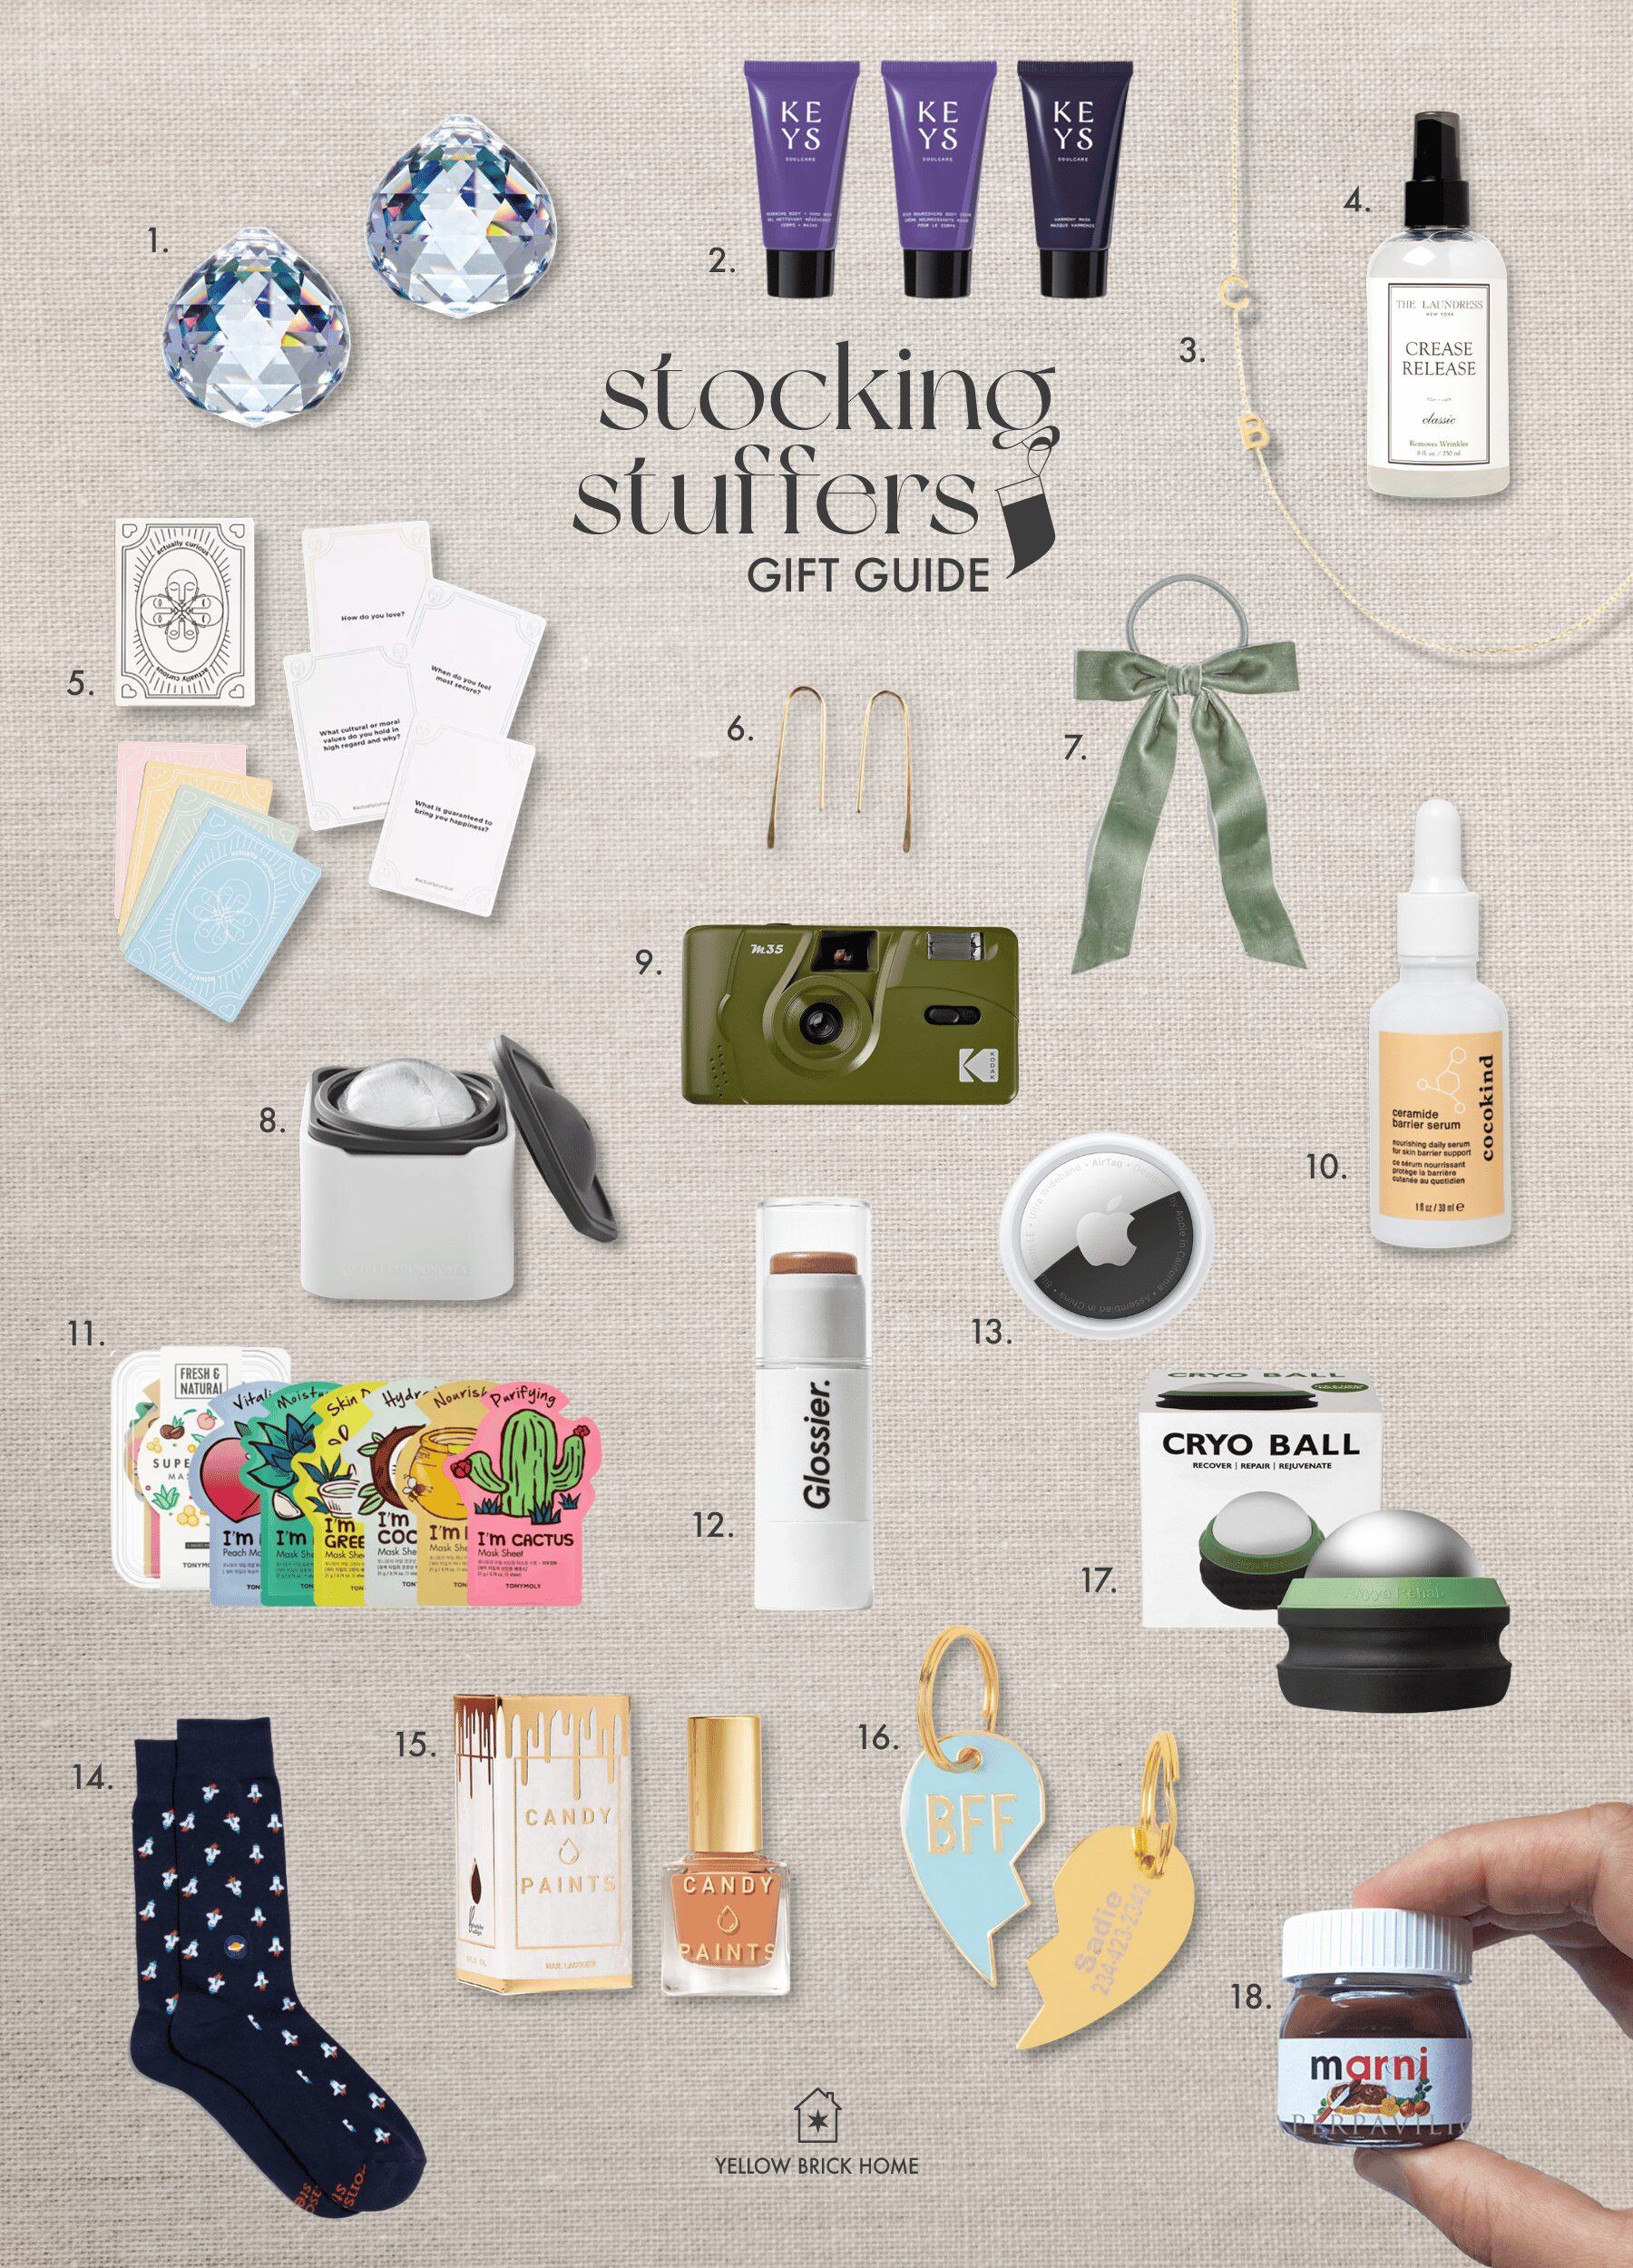 Best stocking stuffers gift guide, ideas from Yellow Brick Home